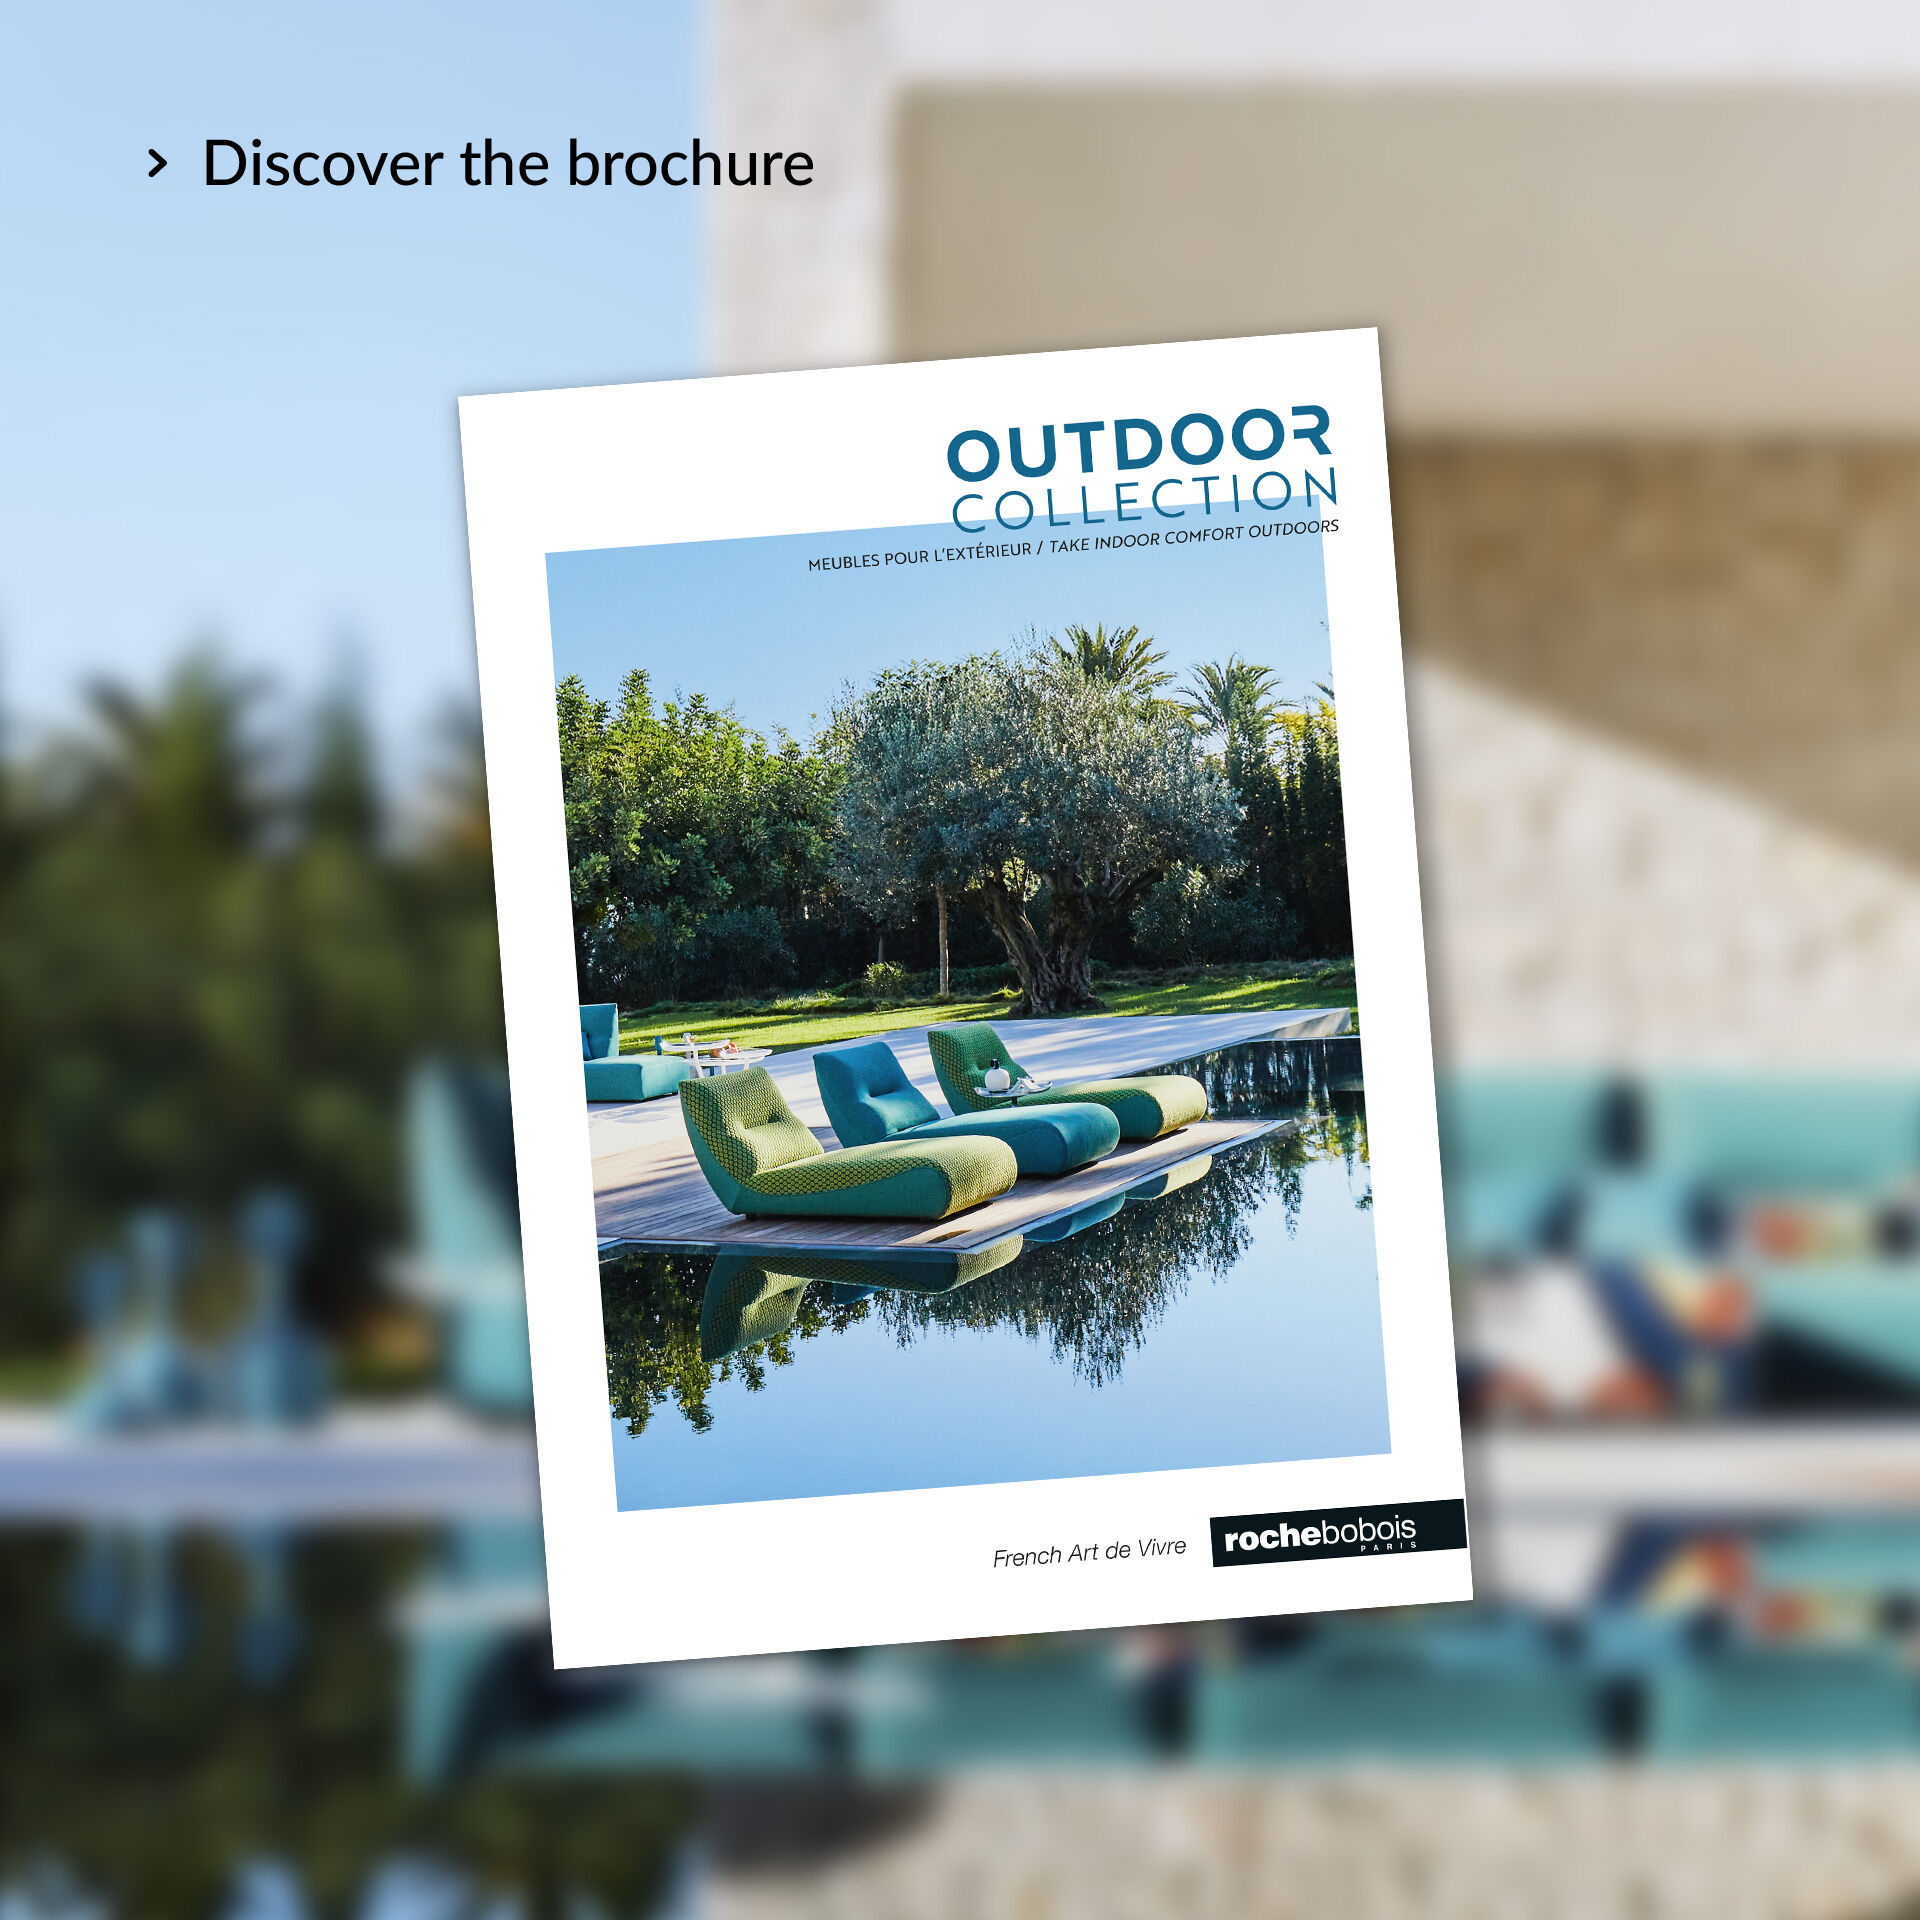 Discover the Outdoor brochure